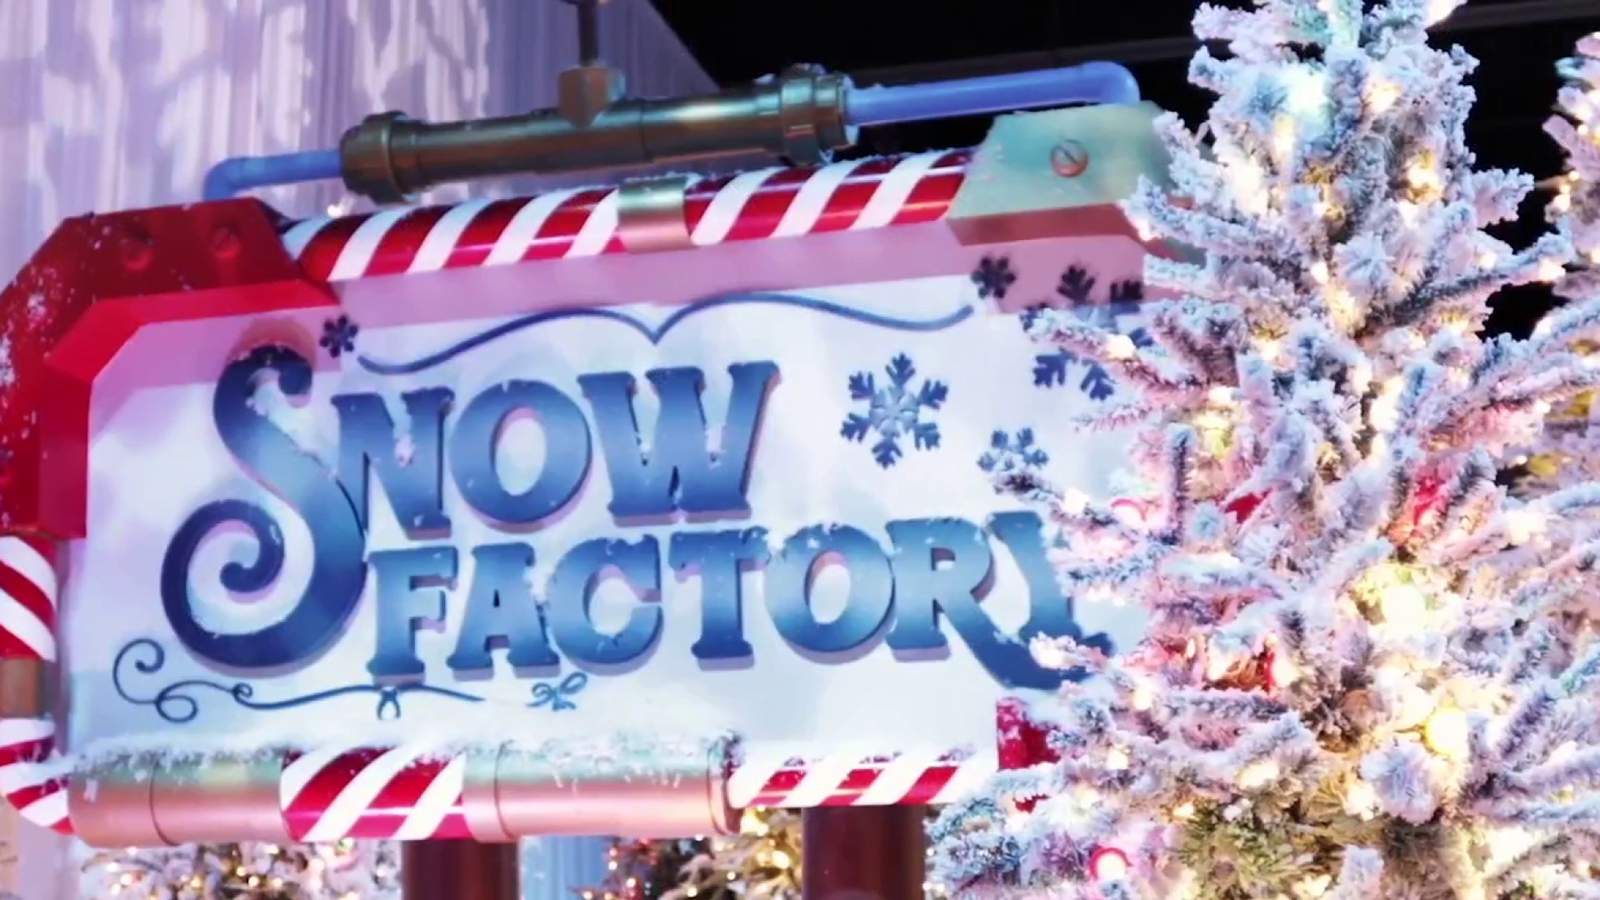 Who else loves the holidays? This is the Christmas theme park experience you need in your life